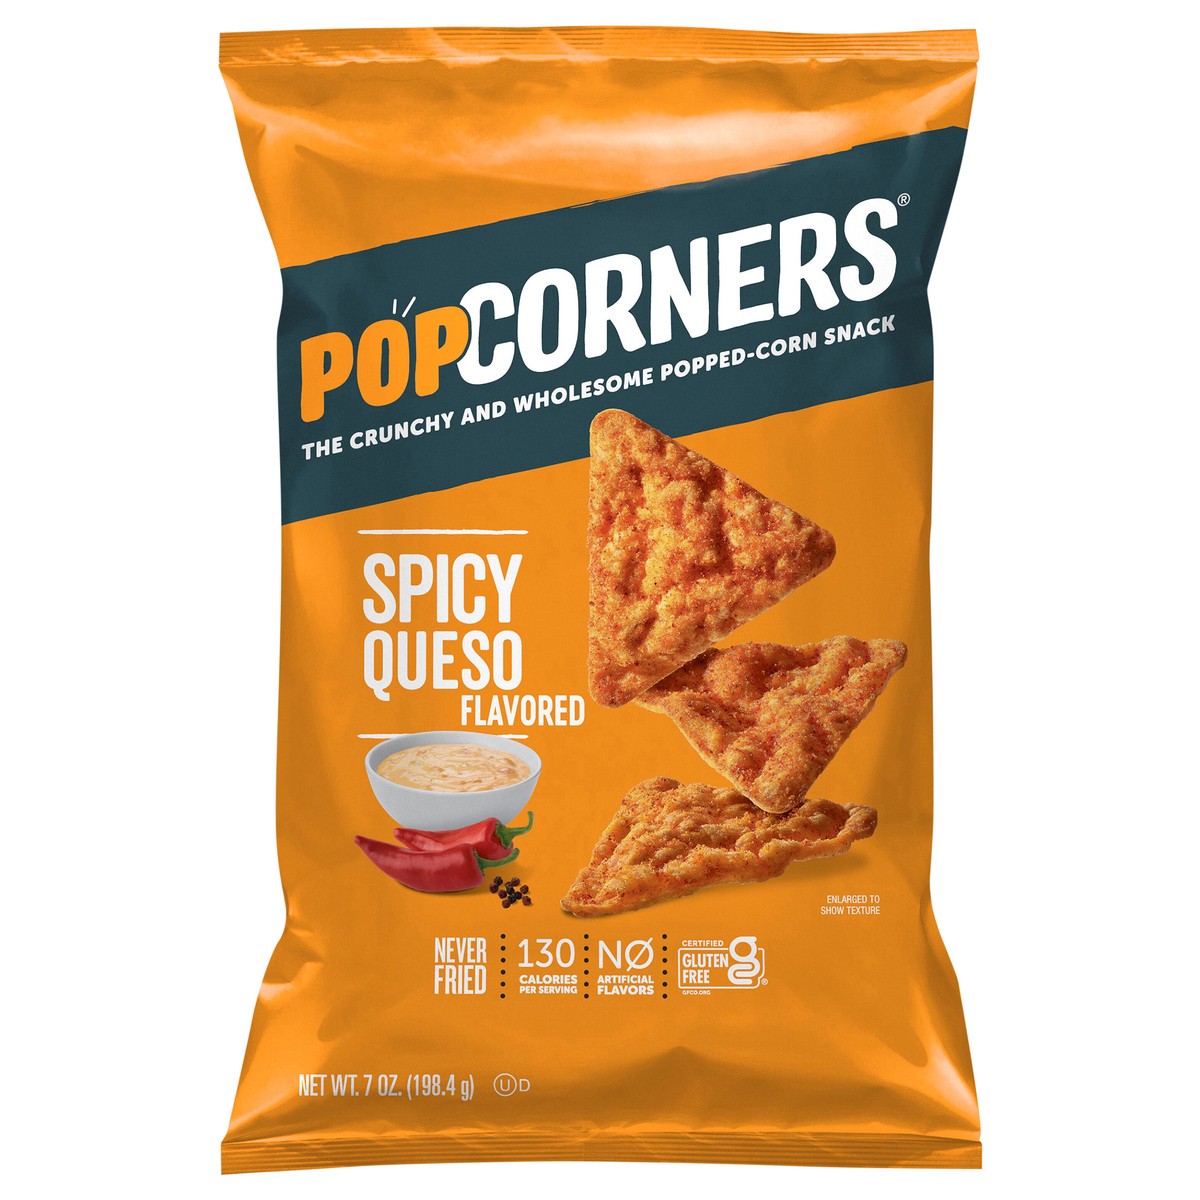 slide 1 of 3, PopCorners The Crunchy And Wholesome Popped-Corn Snack Spicy Queso Flavored 7 Oz, 7 oz